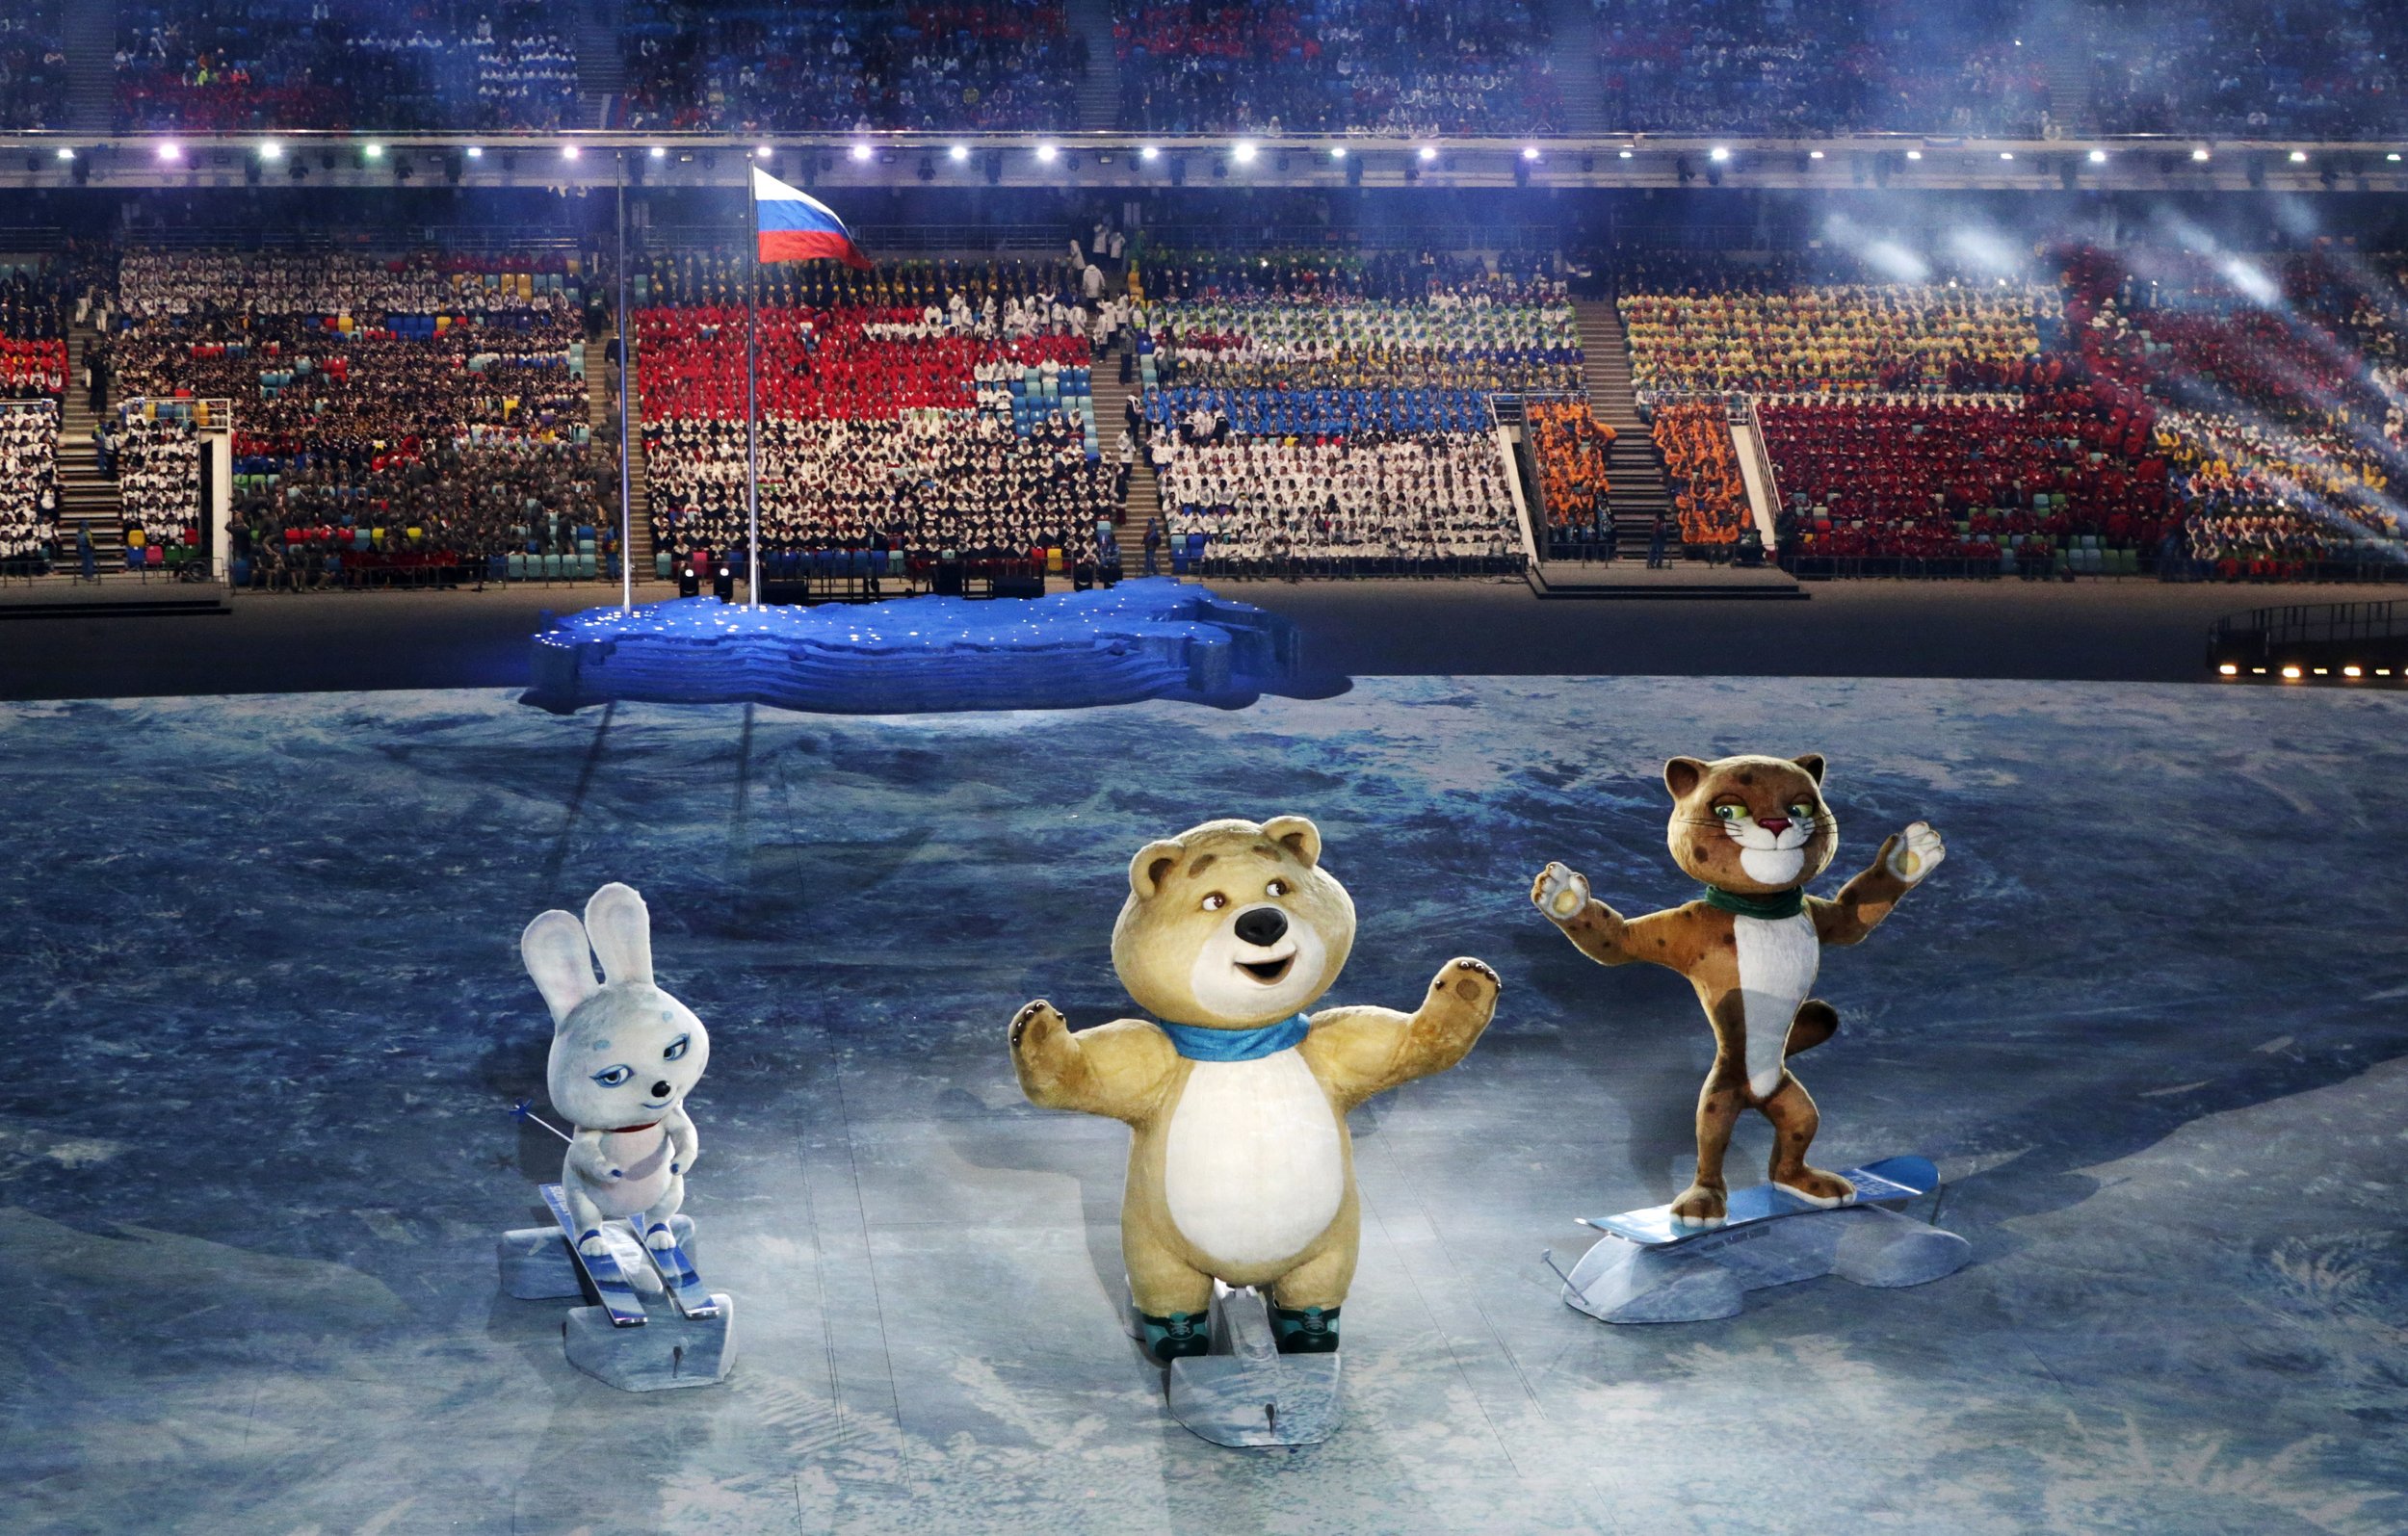  Robotic mascots perform during the opening ceremony of the 2014 Winter Olympics in Sochi, Russia, Feb. 7, 2014. (AP Photo/Robert F. Bukaty) 